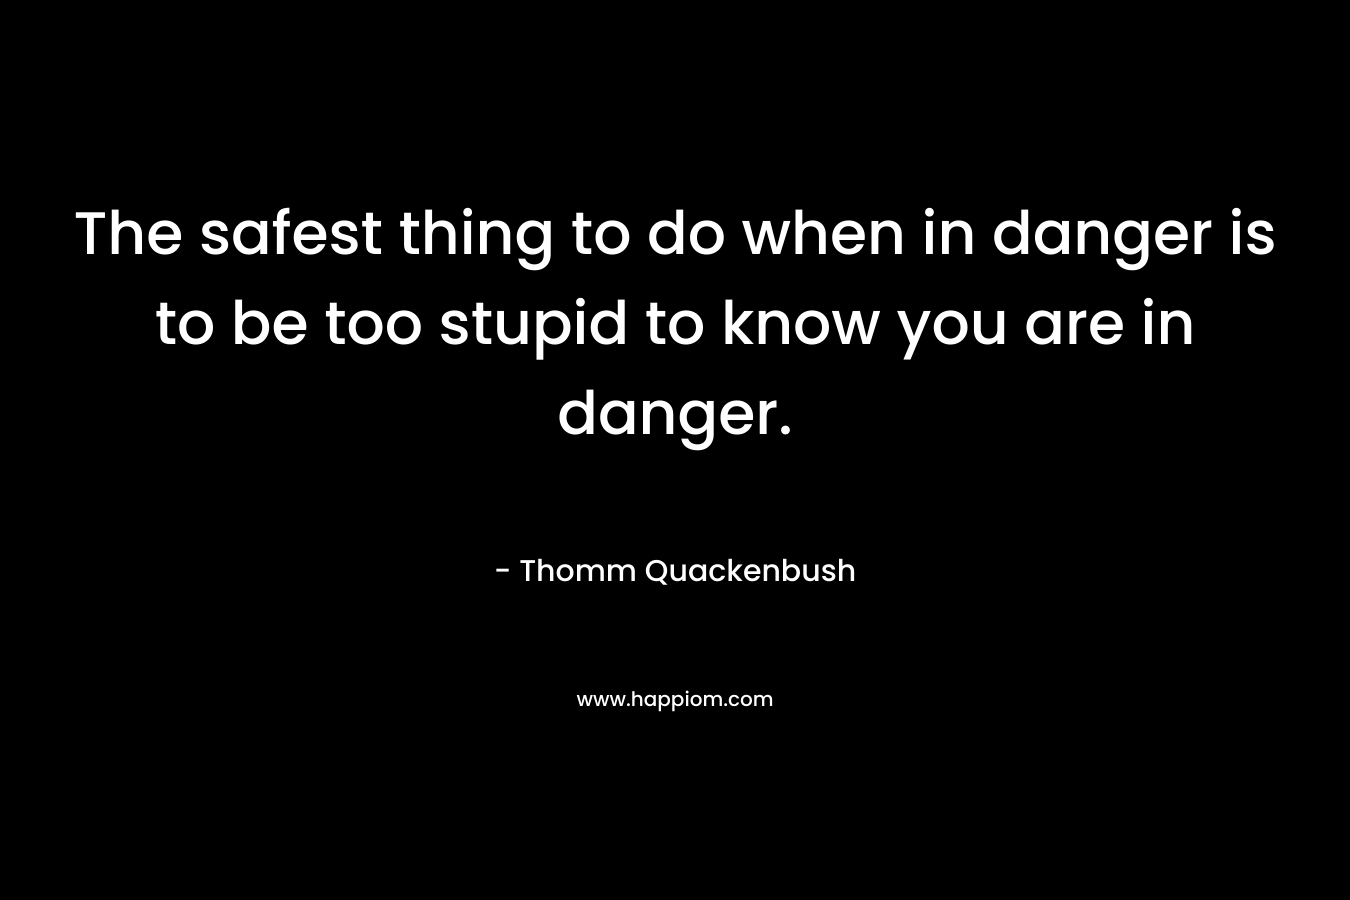 The safest thing to do when in danger is to be too stupid to know you are in danger. – Thomm Quackenbush